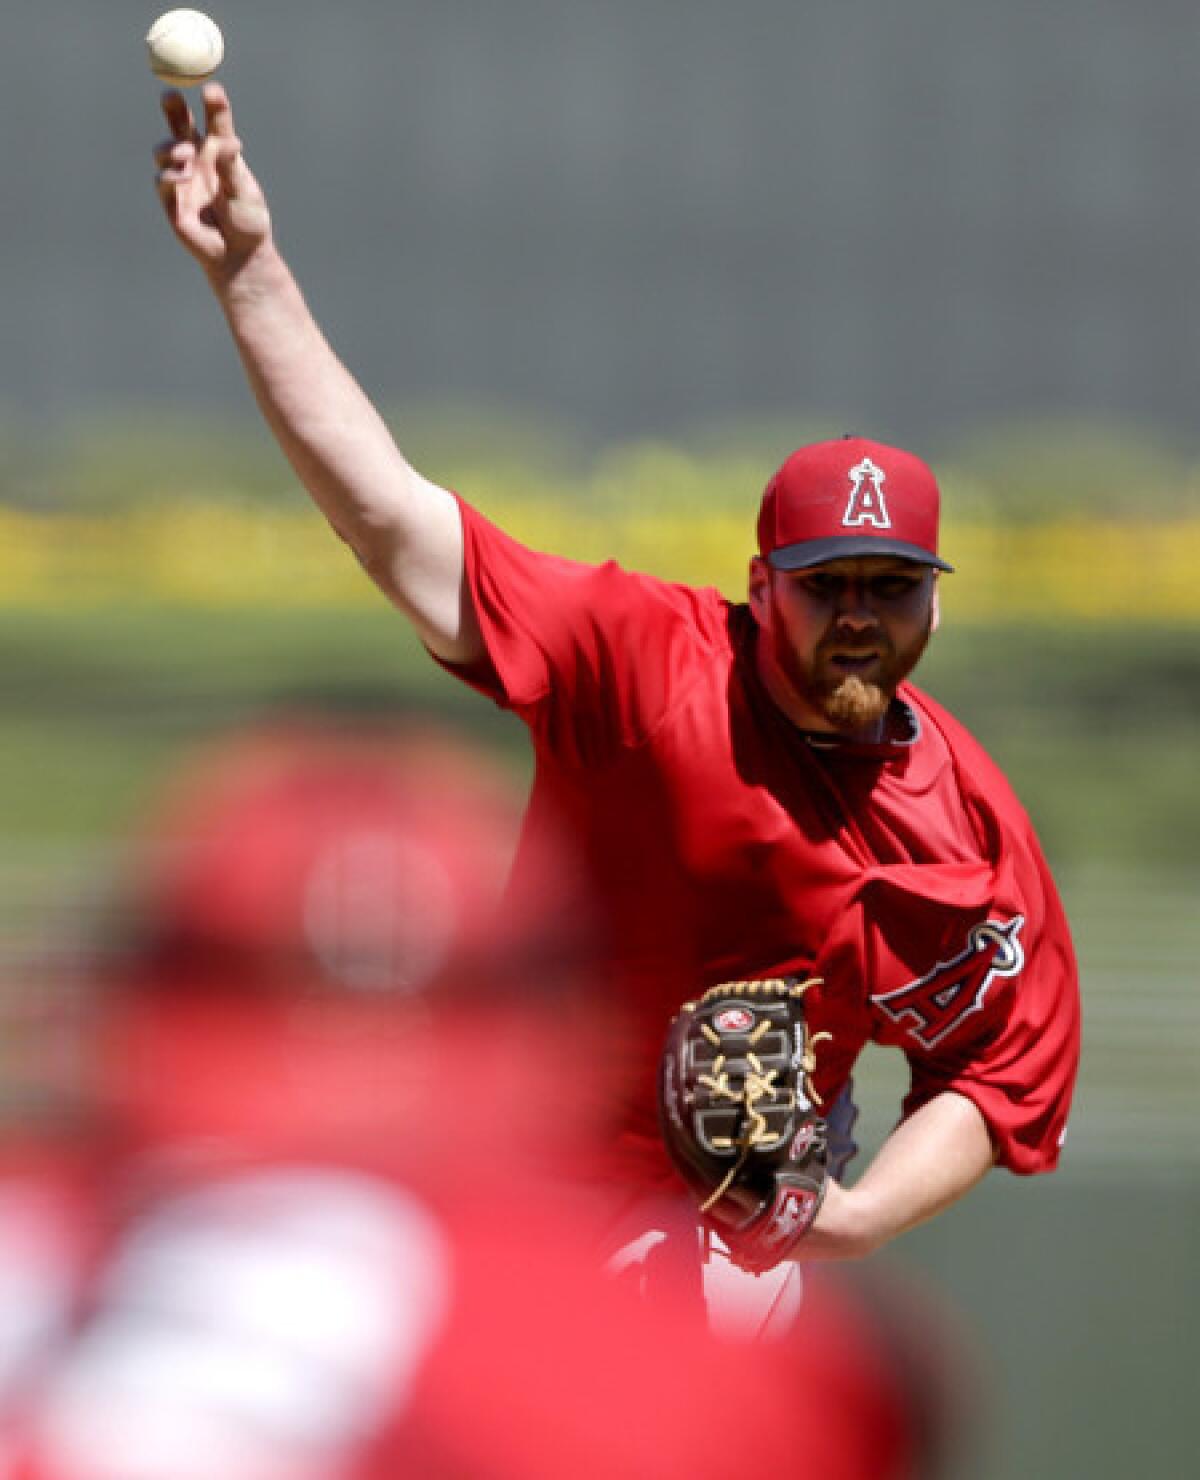 Angels starter Tommy Hanson pitches against the Kansas City Royals in an exhibition game earlier this month.